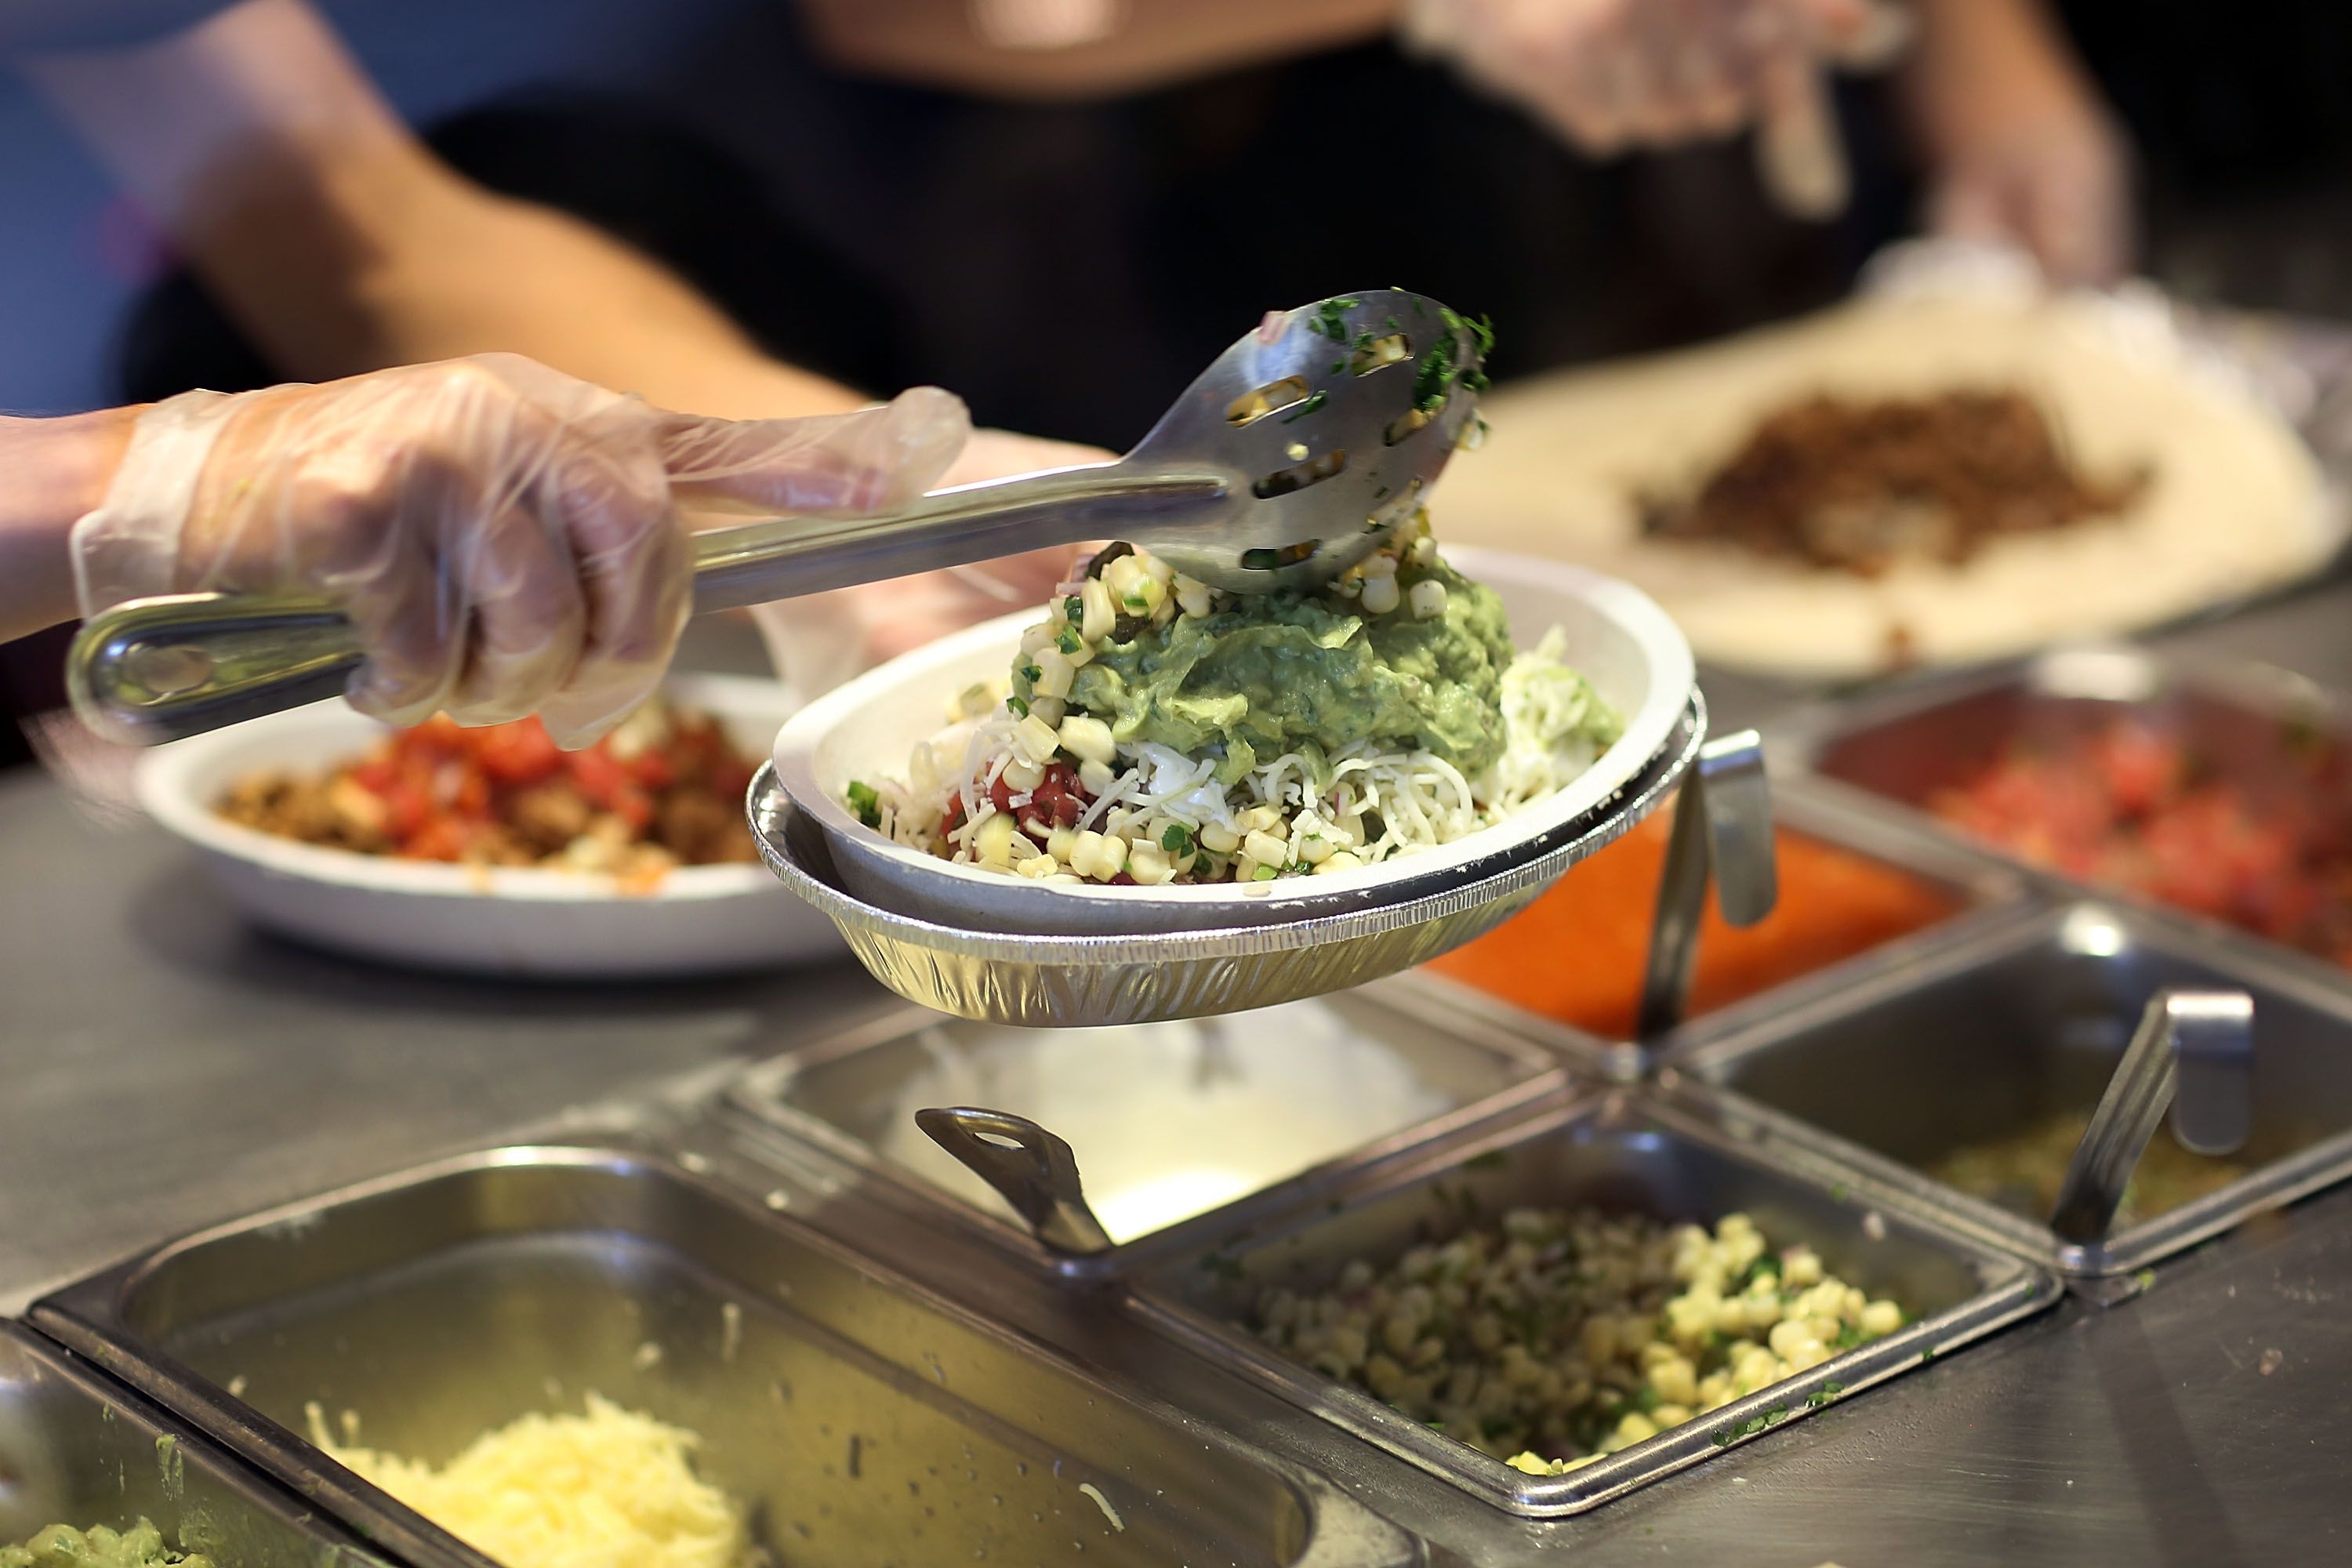 https://hips.hearstapps.com/hmg-prod/images/chipotle-restaurant-workers-fill-orders-for-customers-on-news-photo-1688698290.jpg